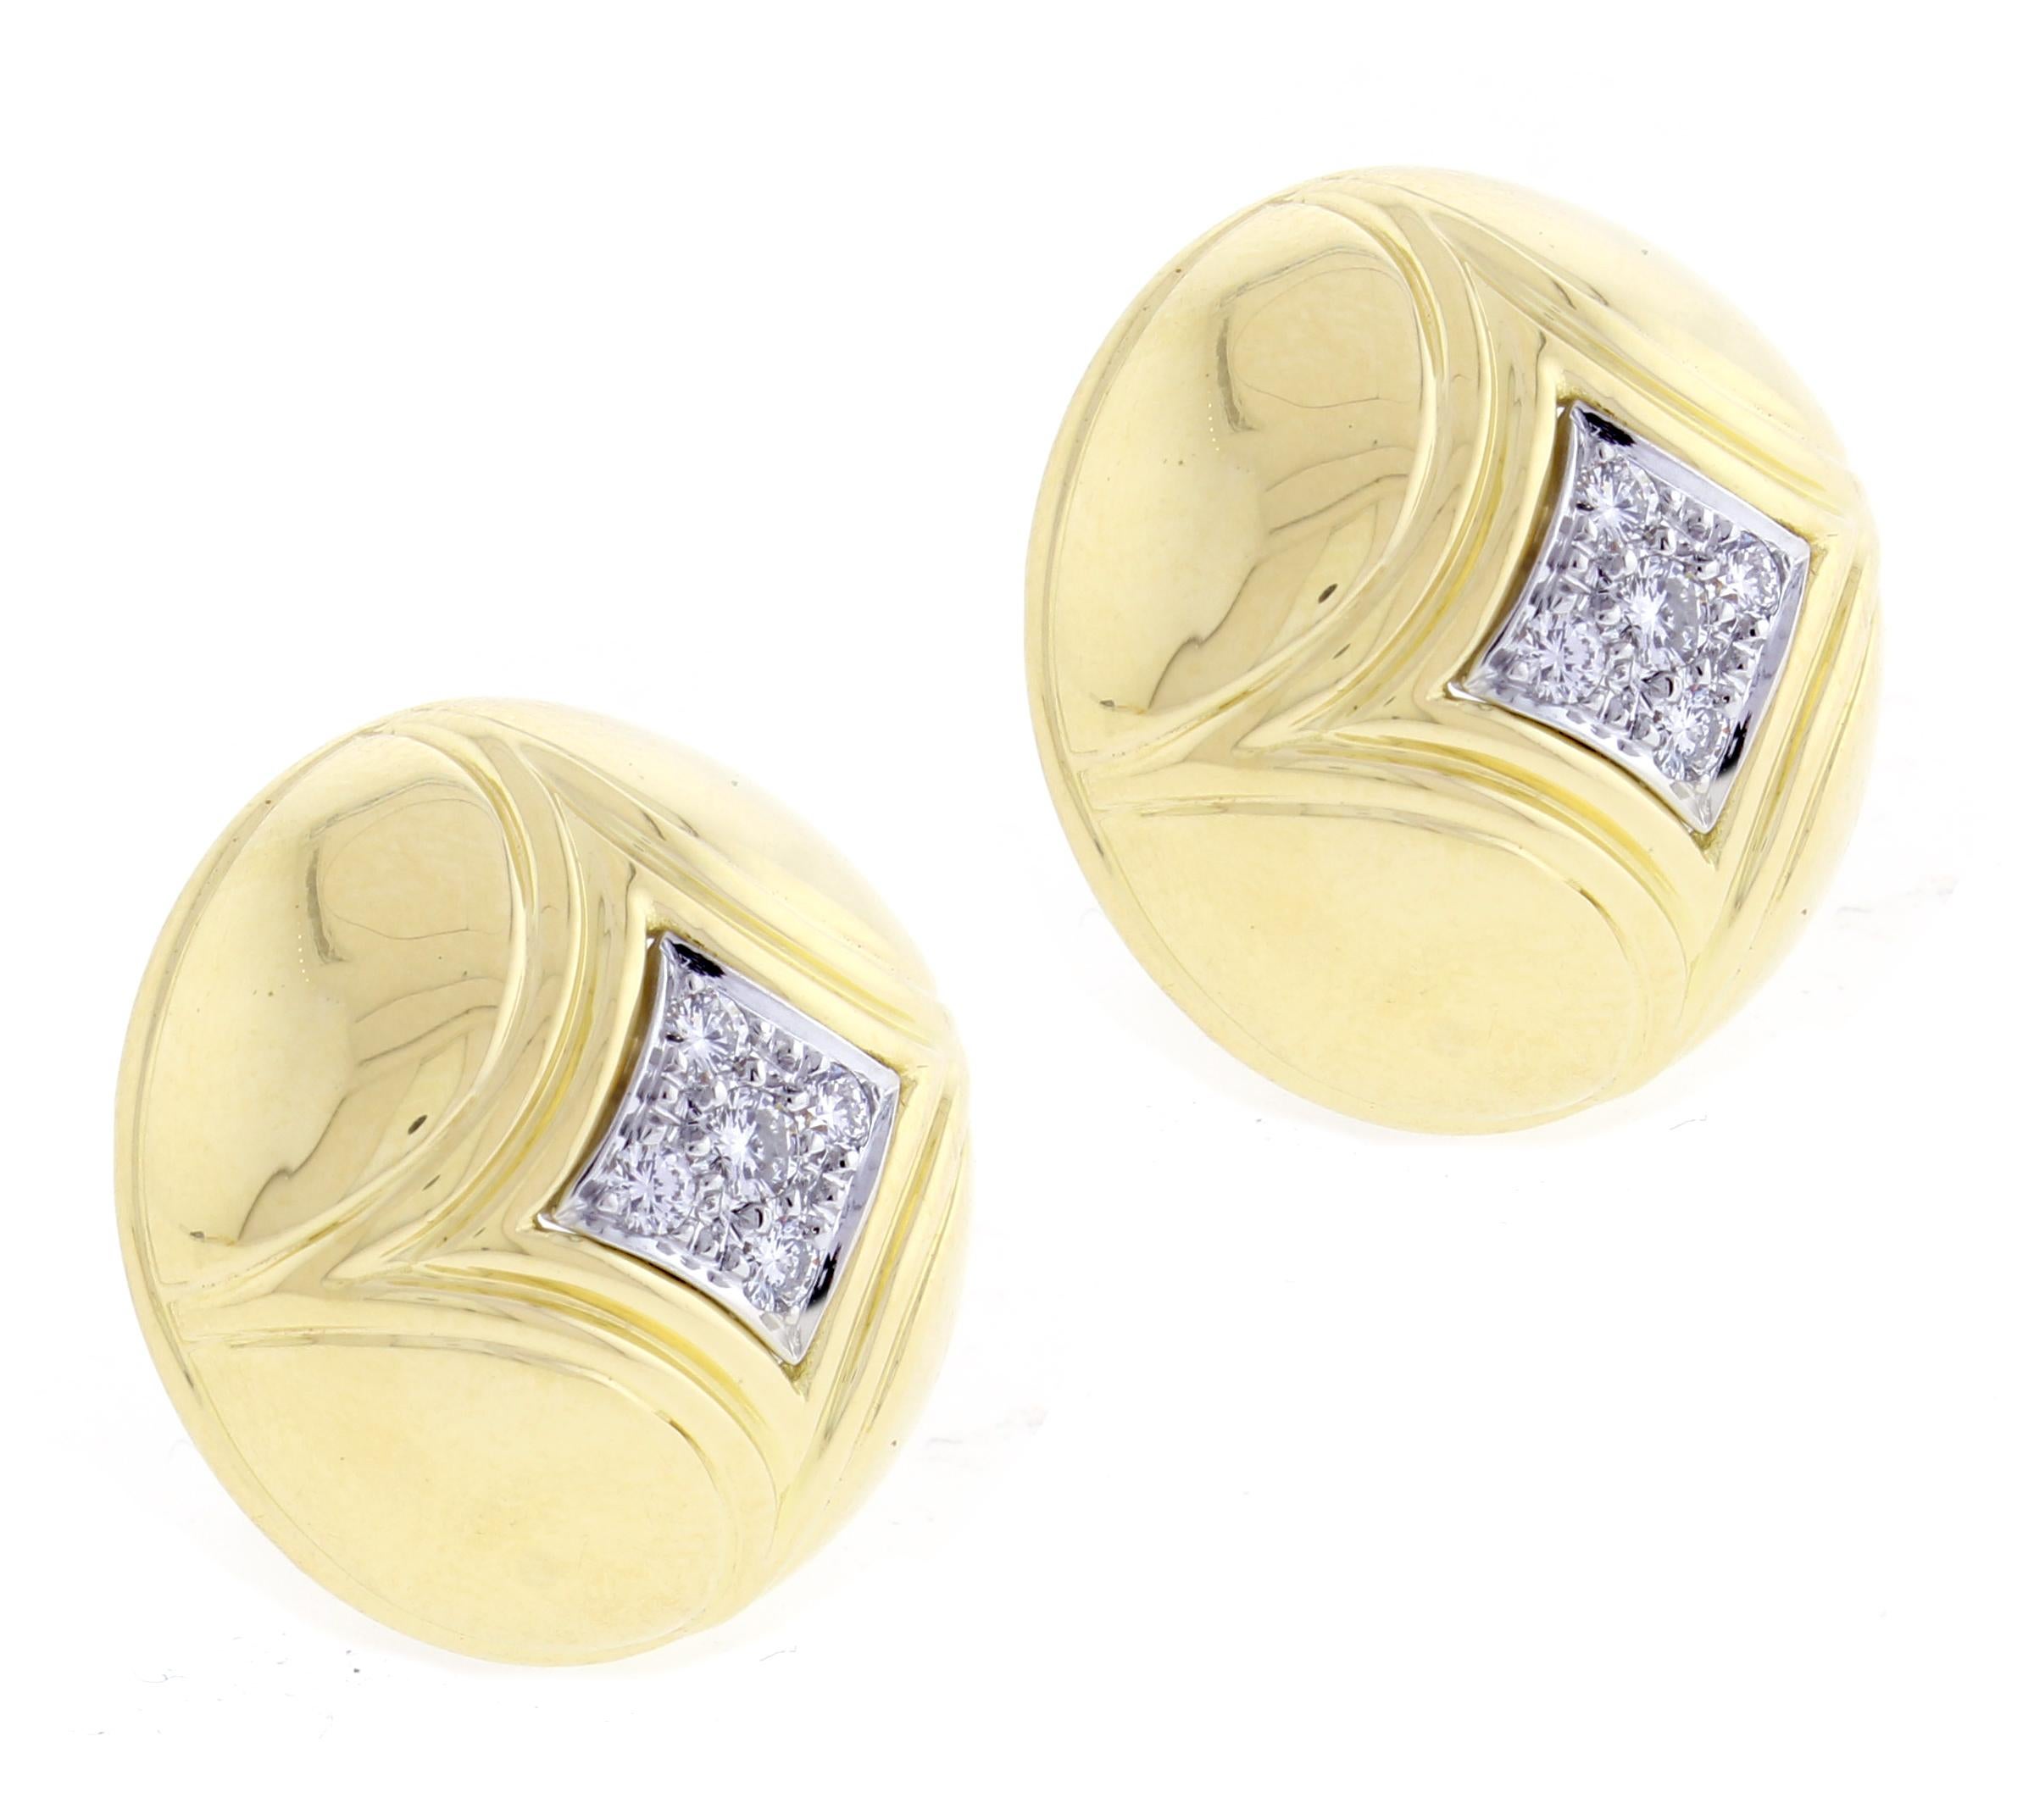 From Van Cleef & Arpels, a pair of diamond dome earrings. The 18 karat white gold dome earrings are 1 inch in diameter and 3/8 of an inch high. The 10 diamonds weigh approximately .50 carats. 24.5 grams 